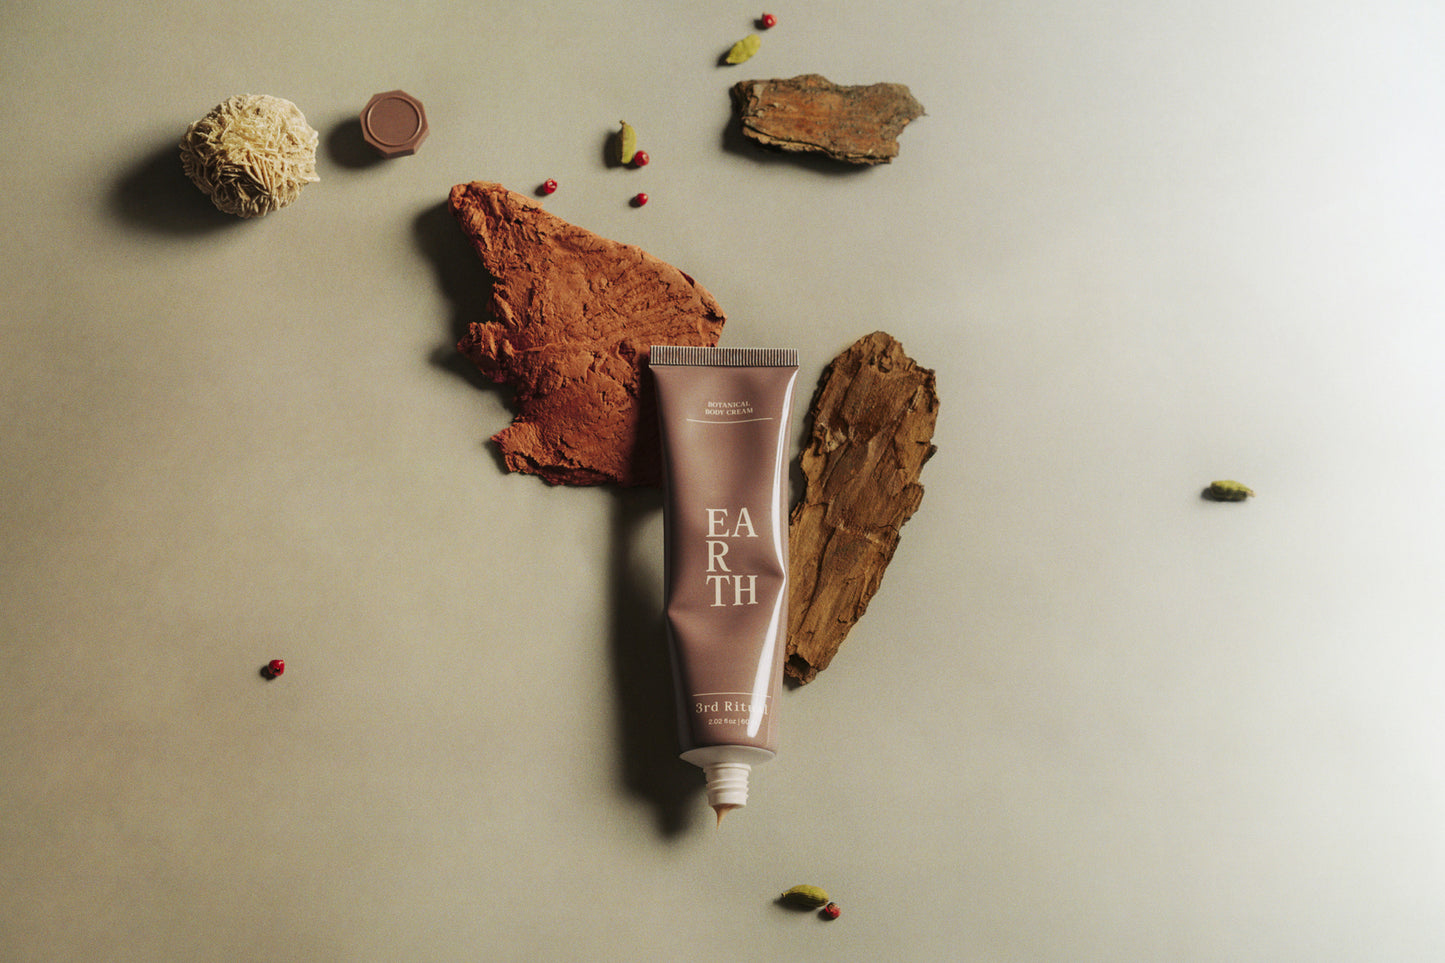 A rich, aromatherapeutic cream by 3rd Ritual // Earth is a grounding blend of vetiver, pink pepper, and rosewood, carried by a rich cream infused with purifying neem extract and Kaolin clay. 